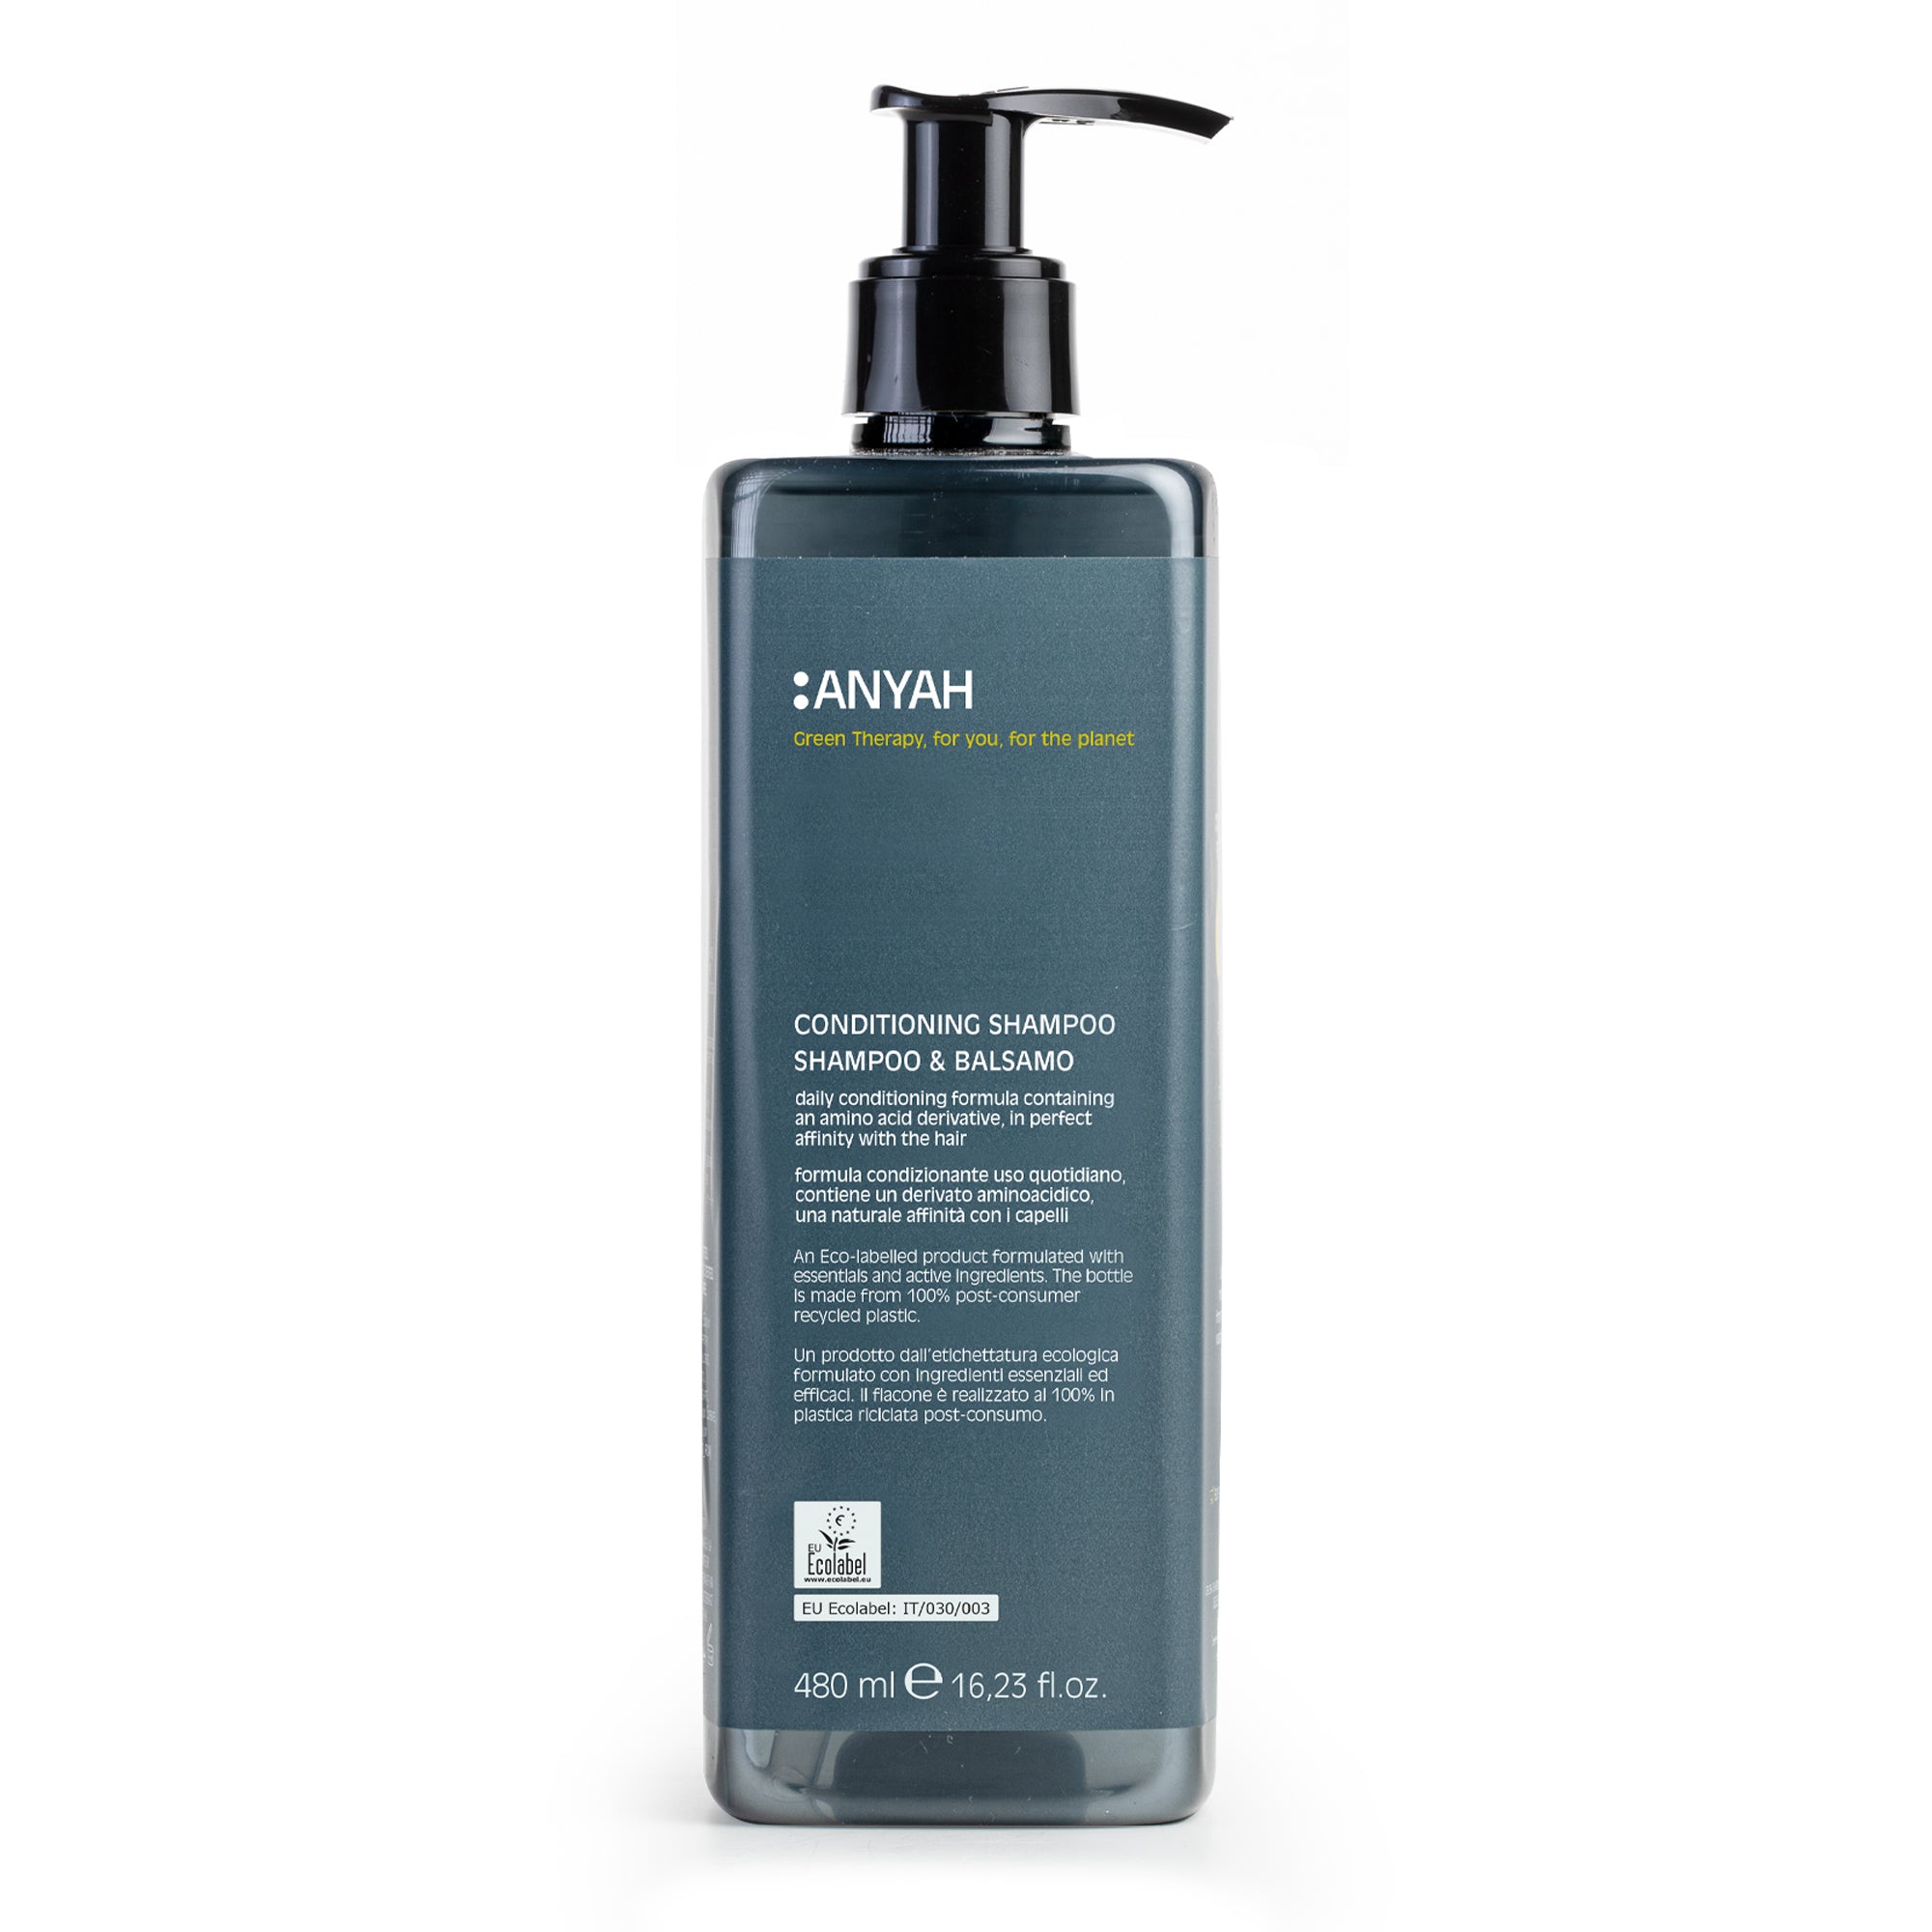 Anyah Conditioning Shampoo Ecolabel Certified 